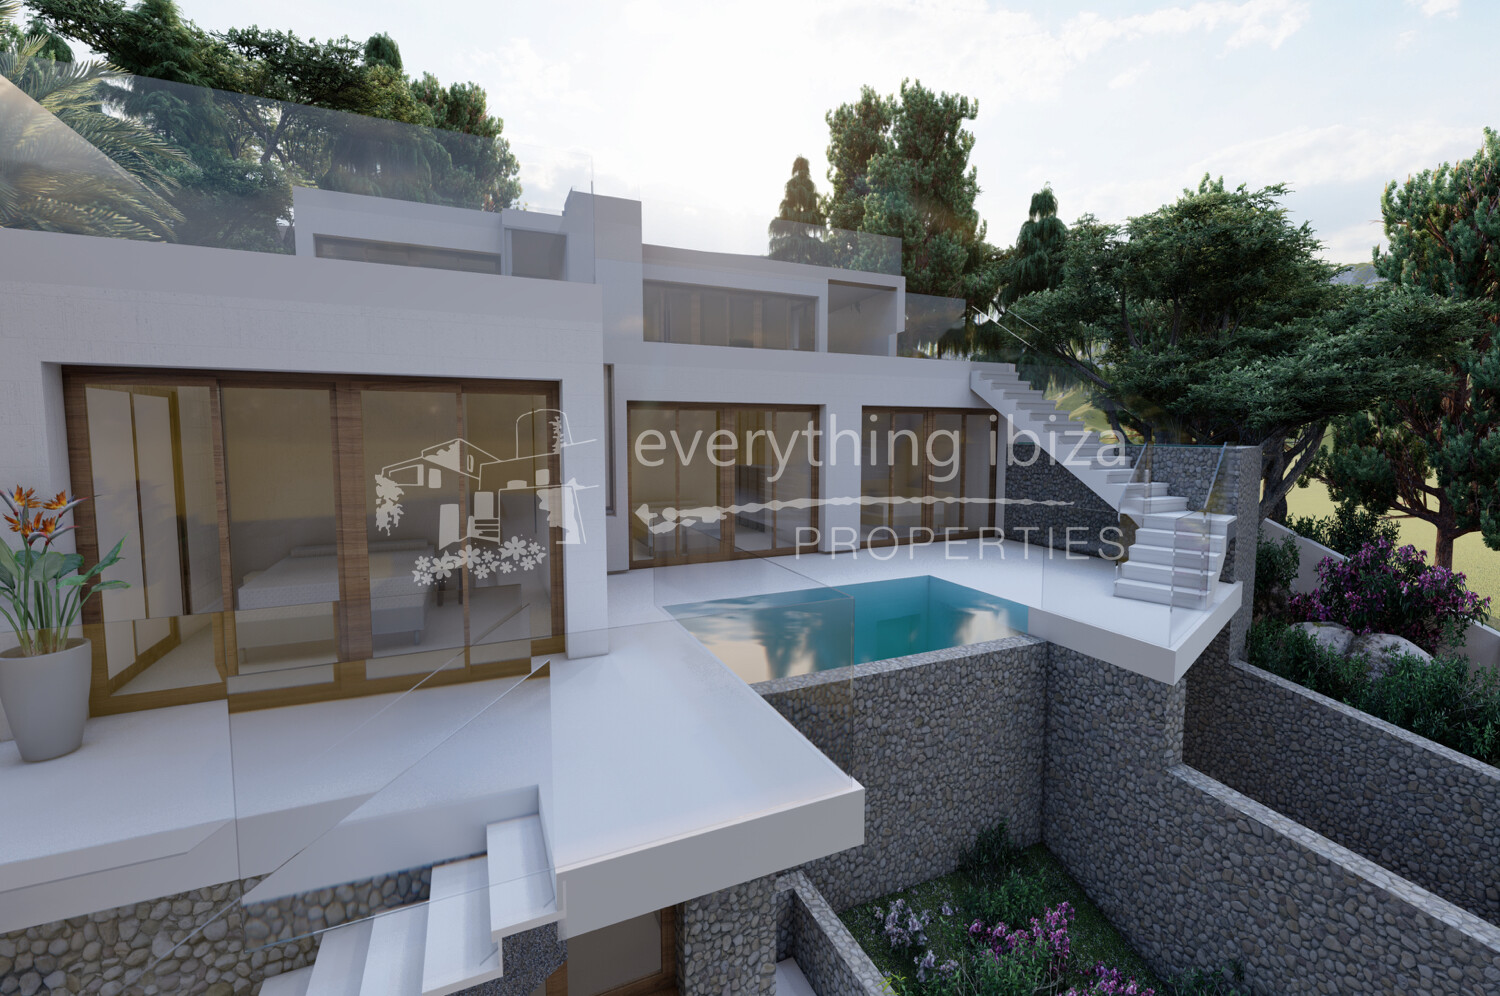 Plot, License & Project in a Stunning Sea & Sunset Facing Location, ref. 1545, for sale in Ibiza by everything ibiza Properties